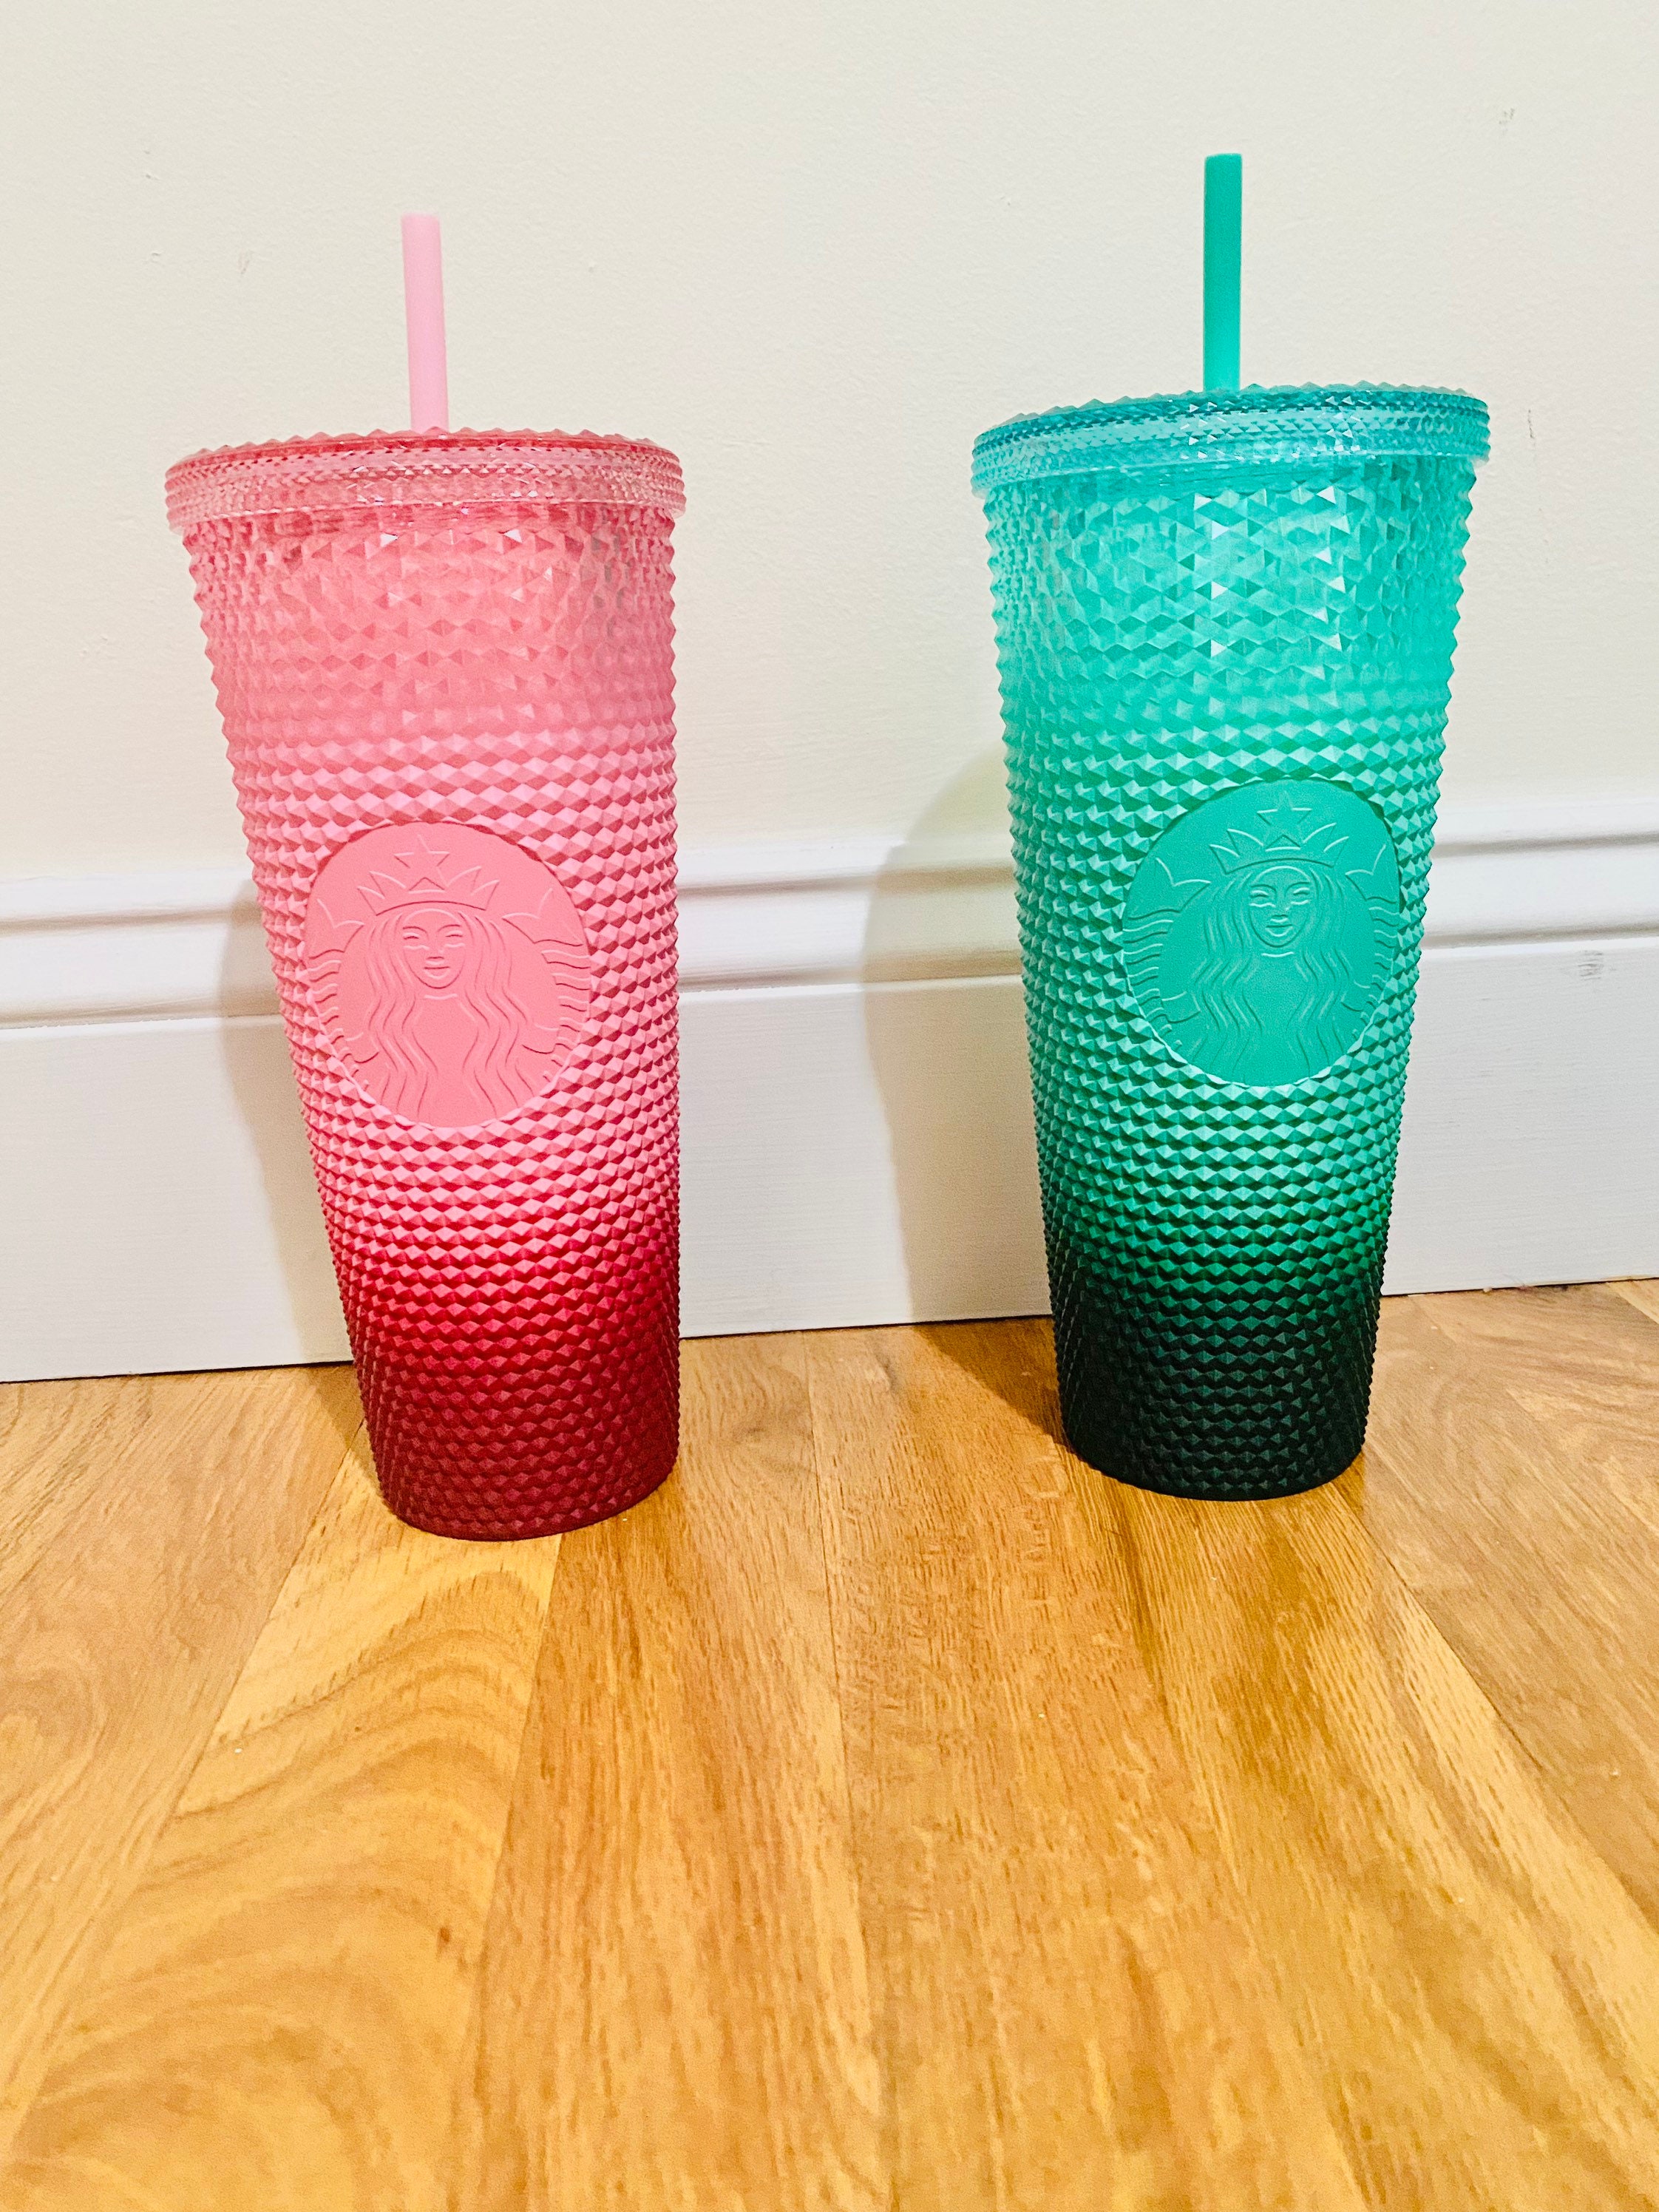 NWT Starbucks Green Ombre Gradient Waxberry Studded Tumbler Cold Cup Venti  24 Oz SKU 011137635 